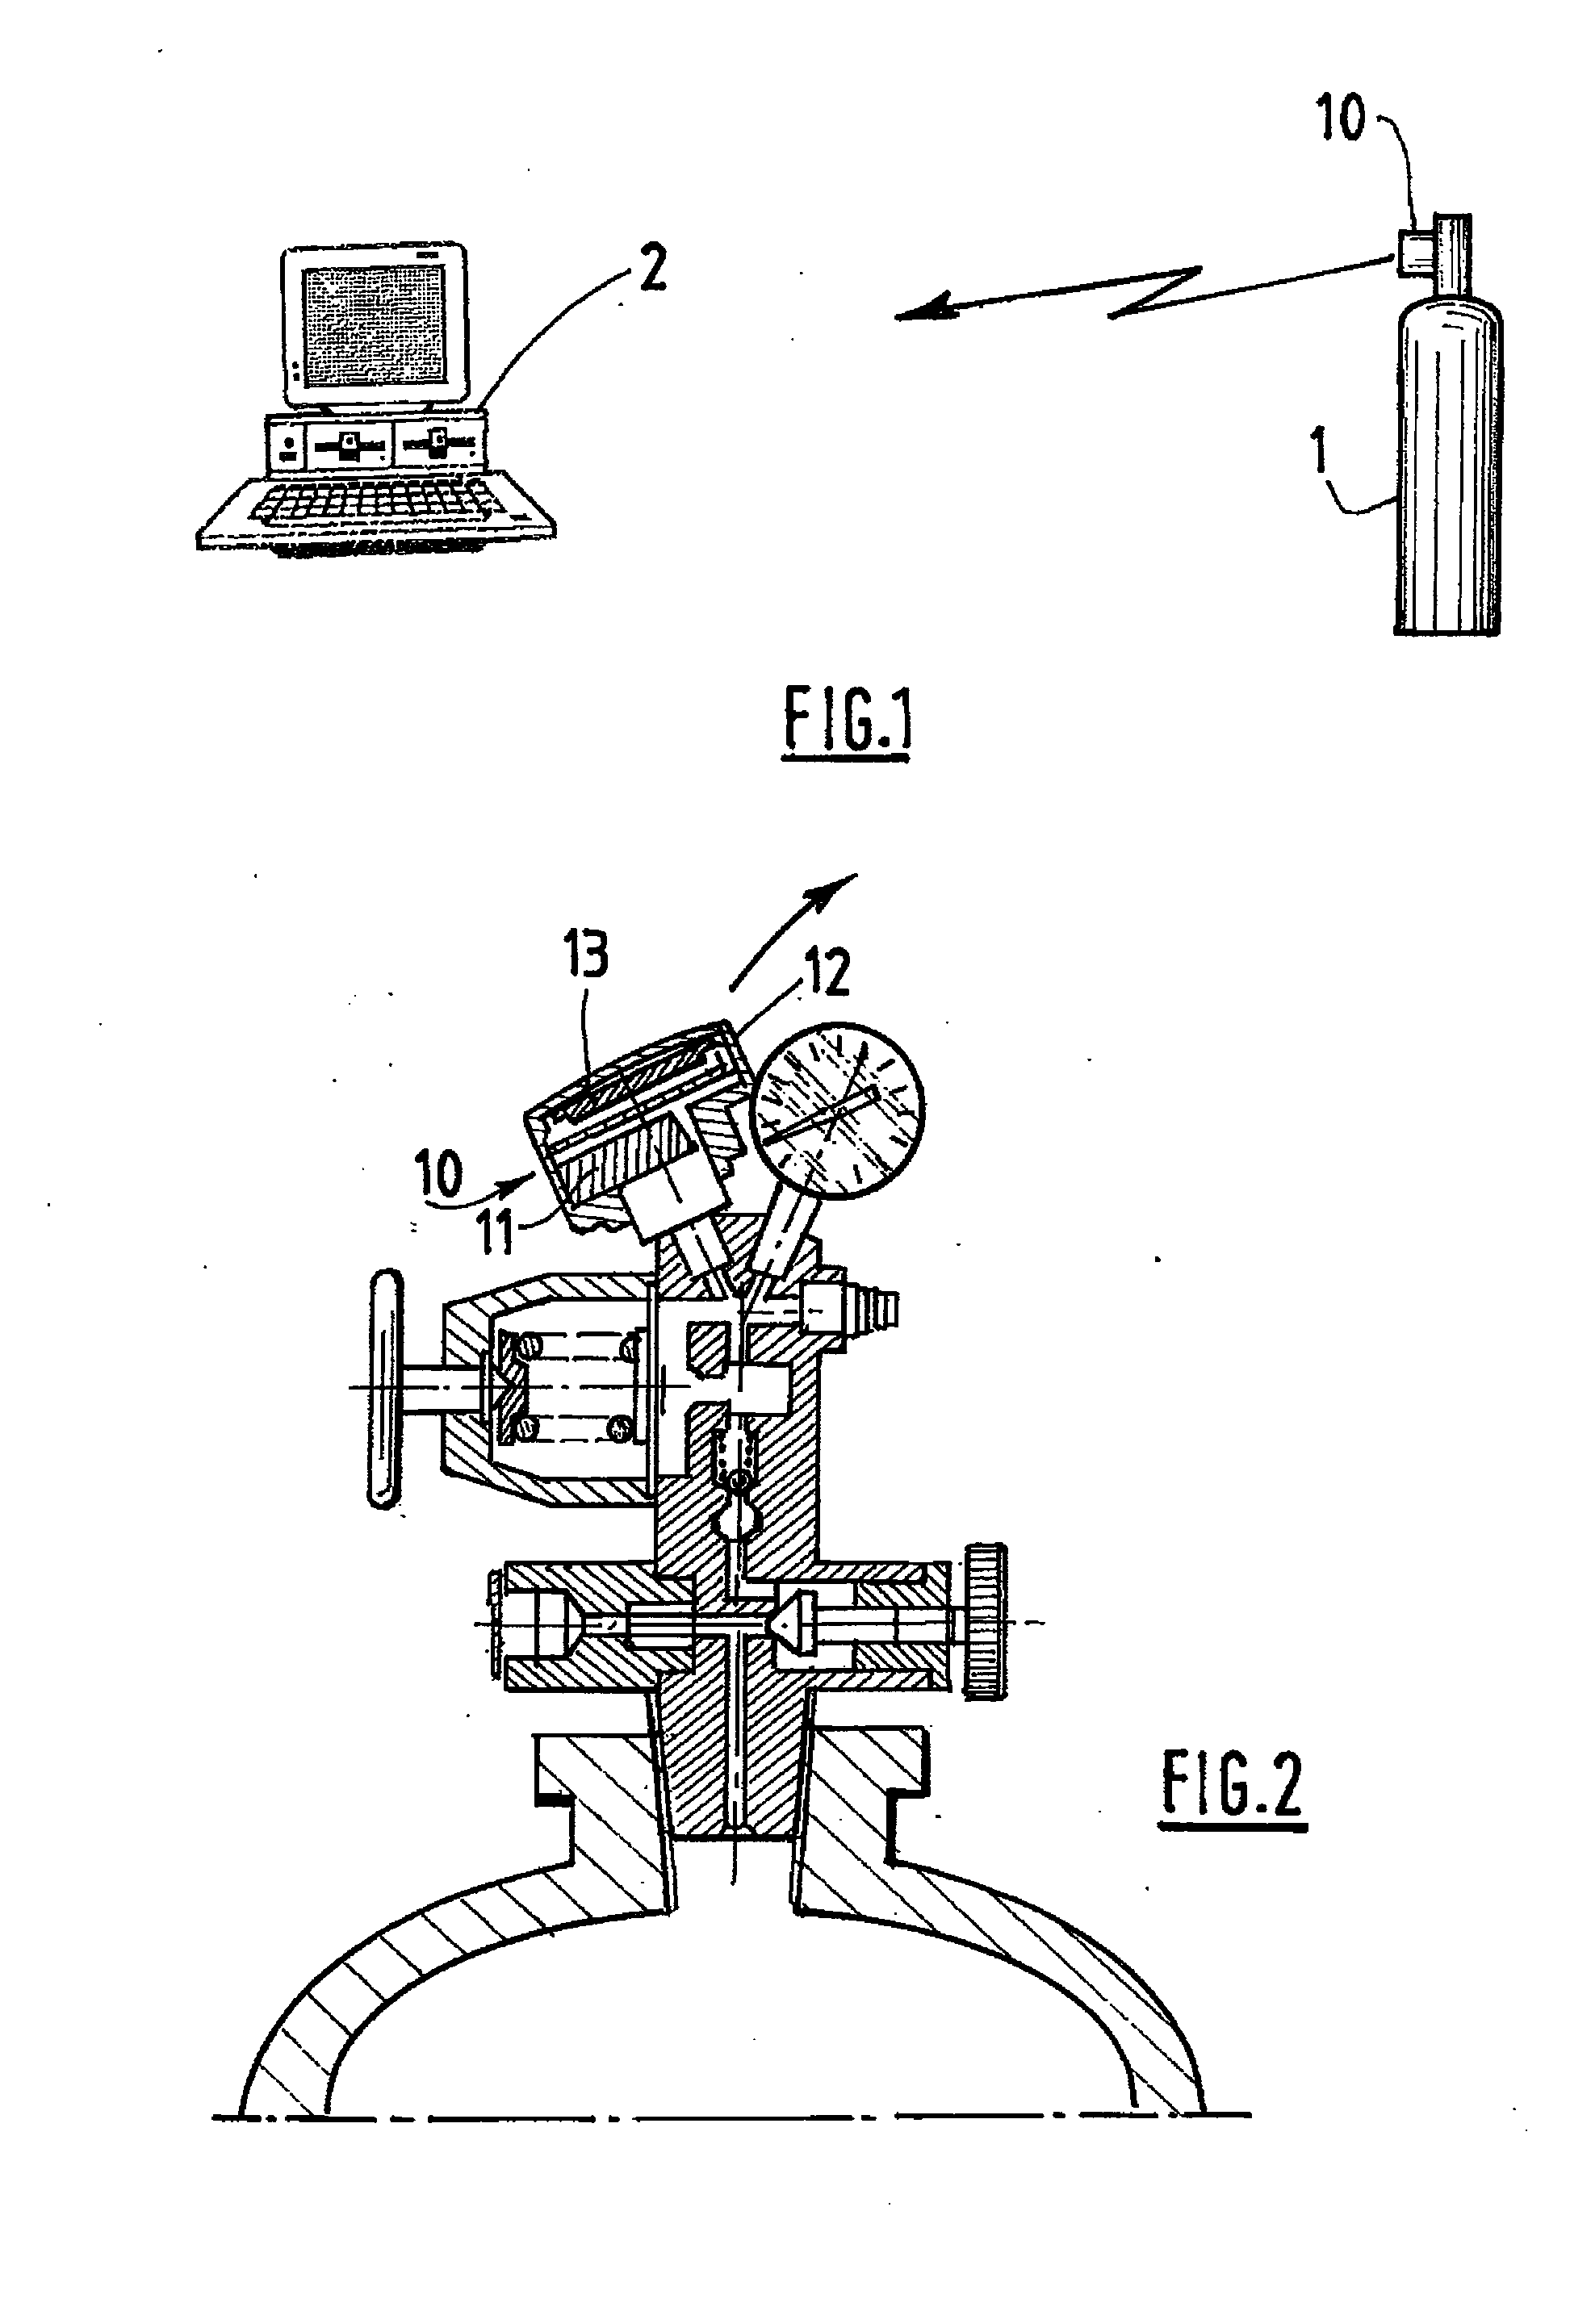 Method for Processing Data Relating to a Cylinder of Fluid under Pressure